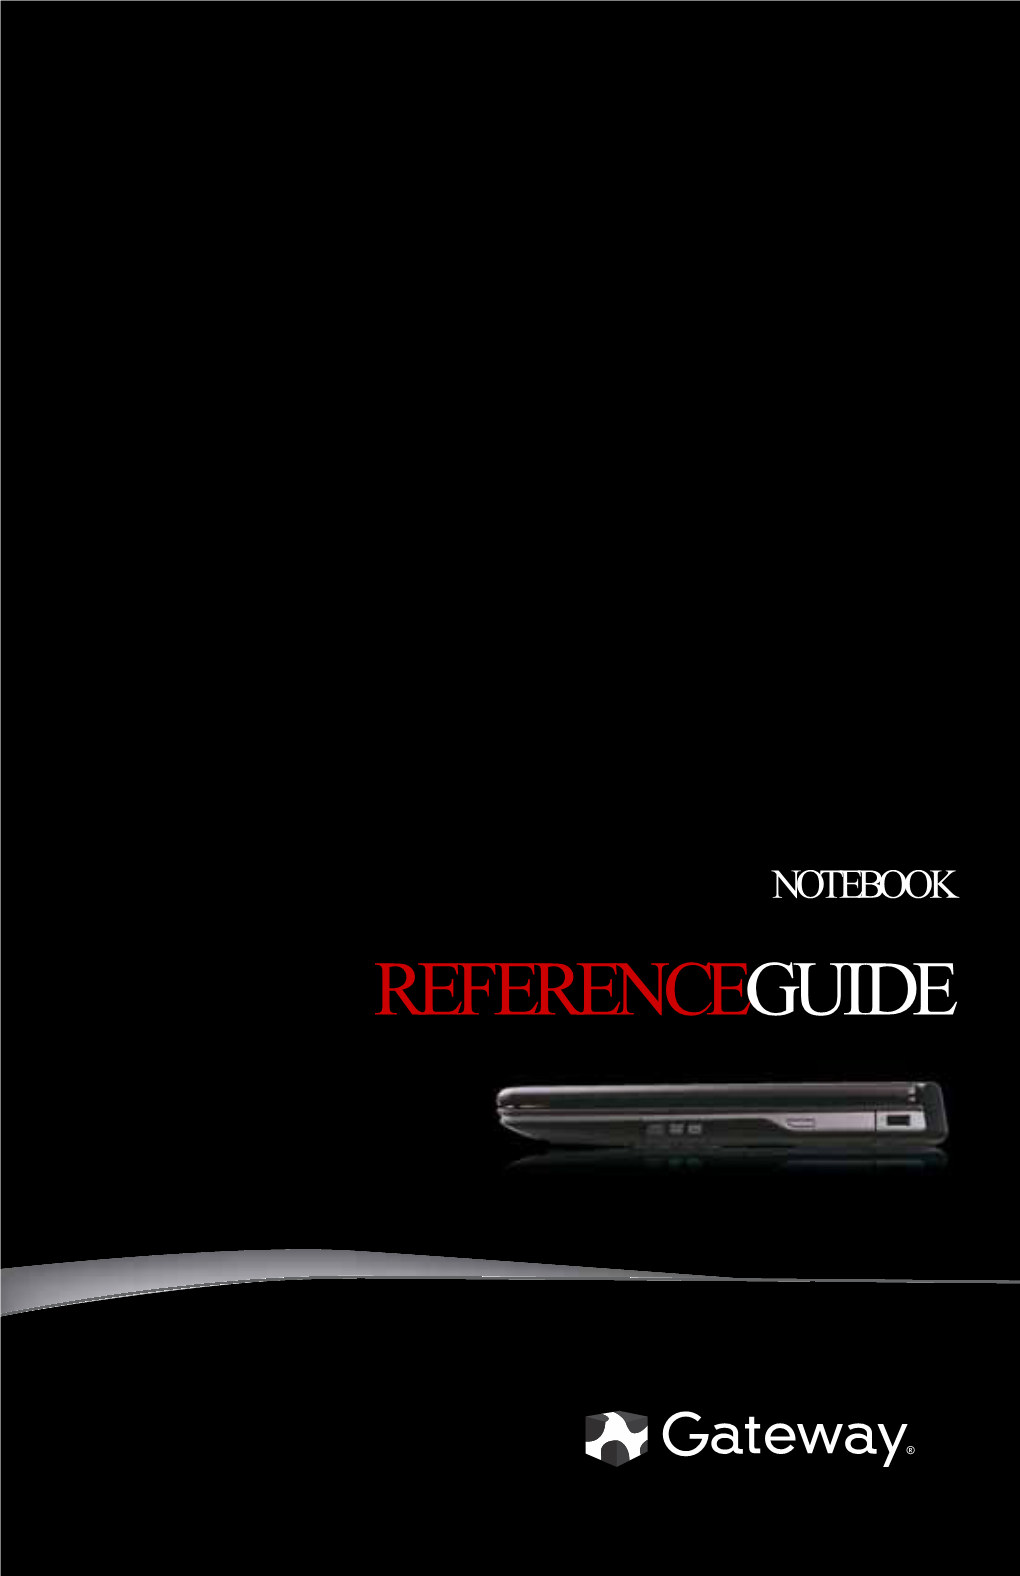 Gateway Notebook Reference Guide